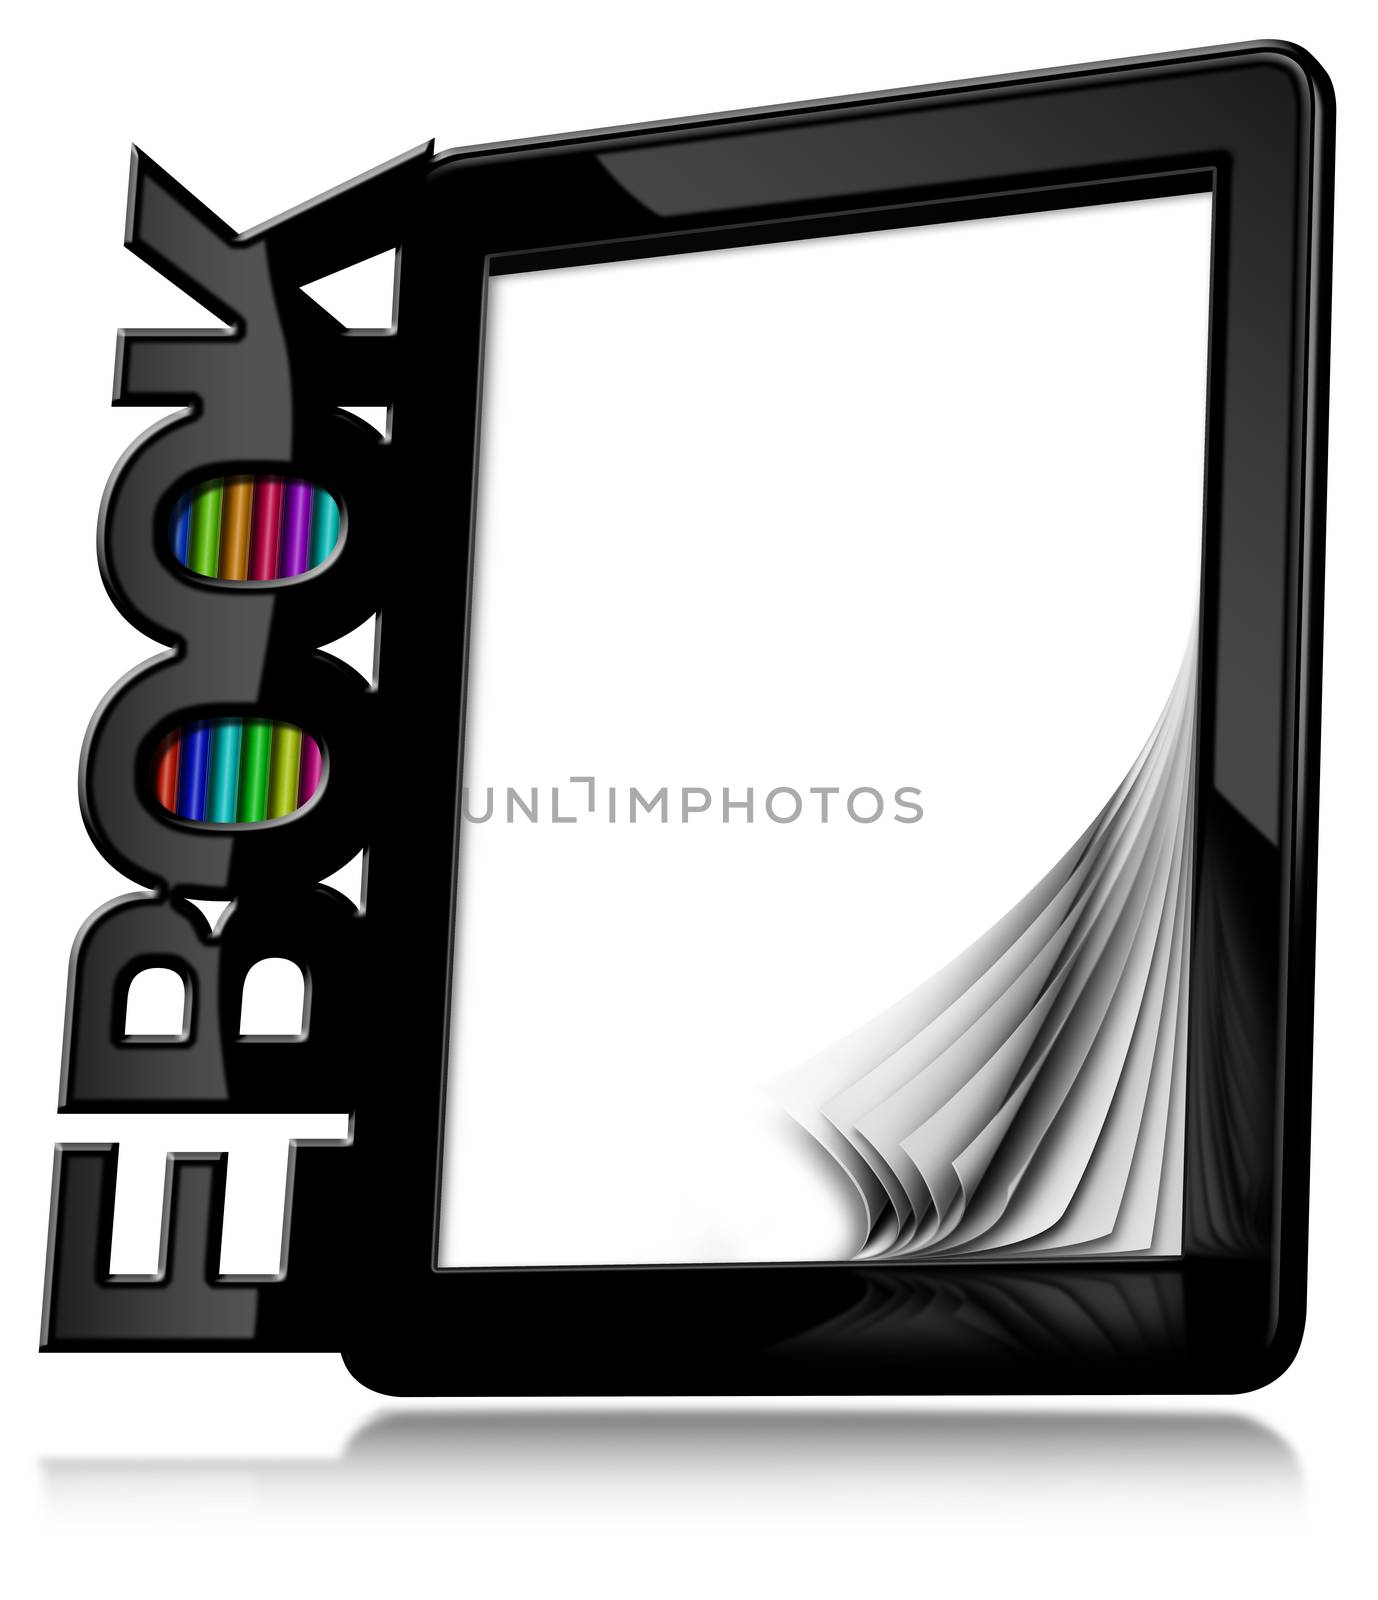 E-book Reader with Blank Pages by catalby